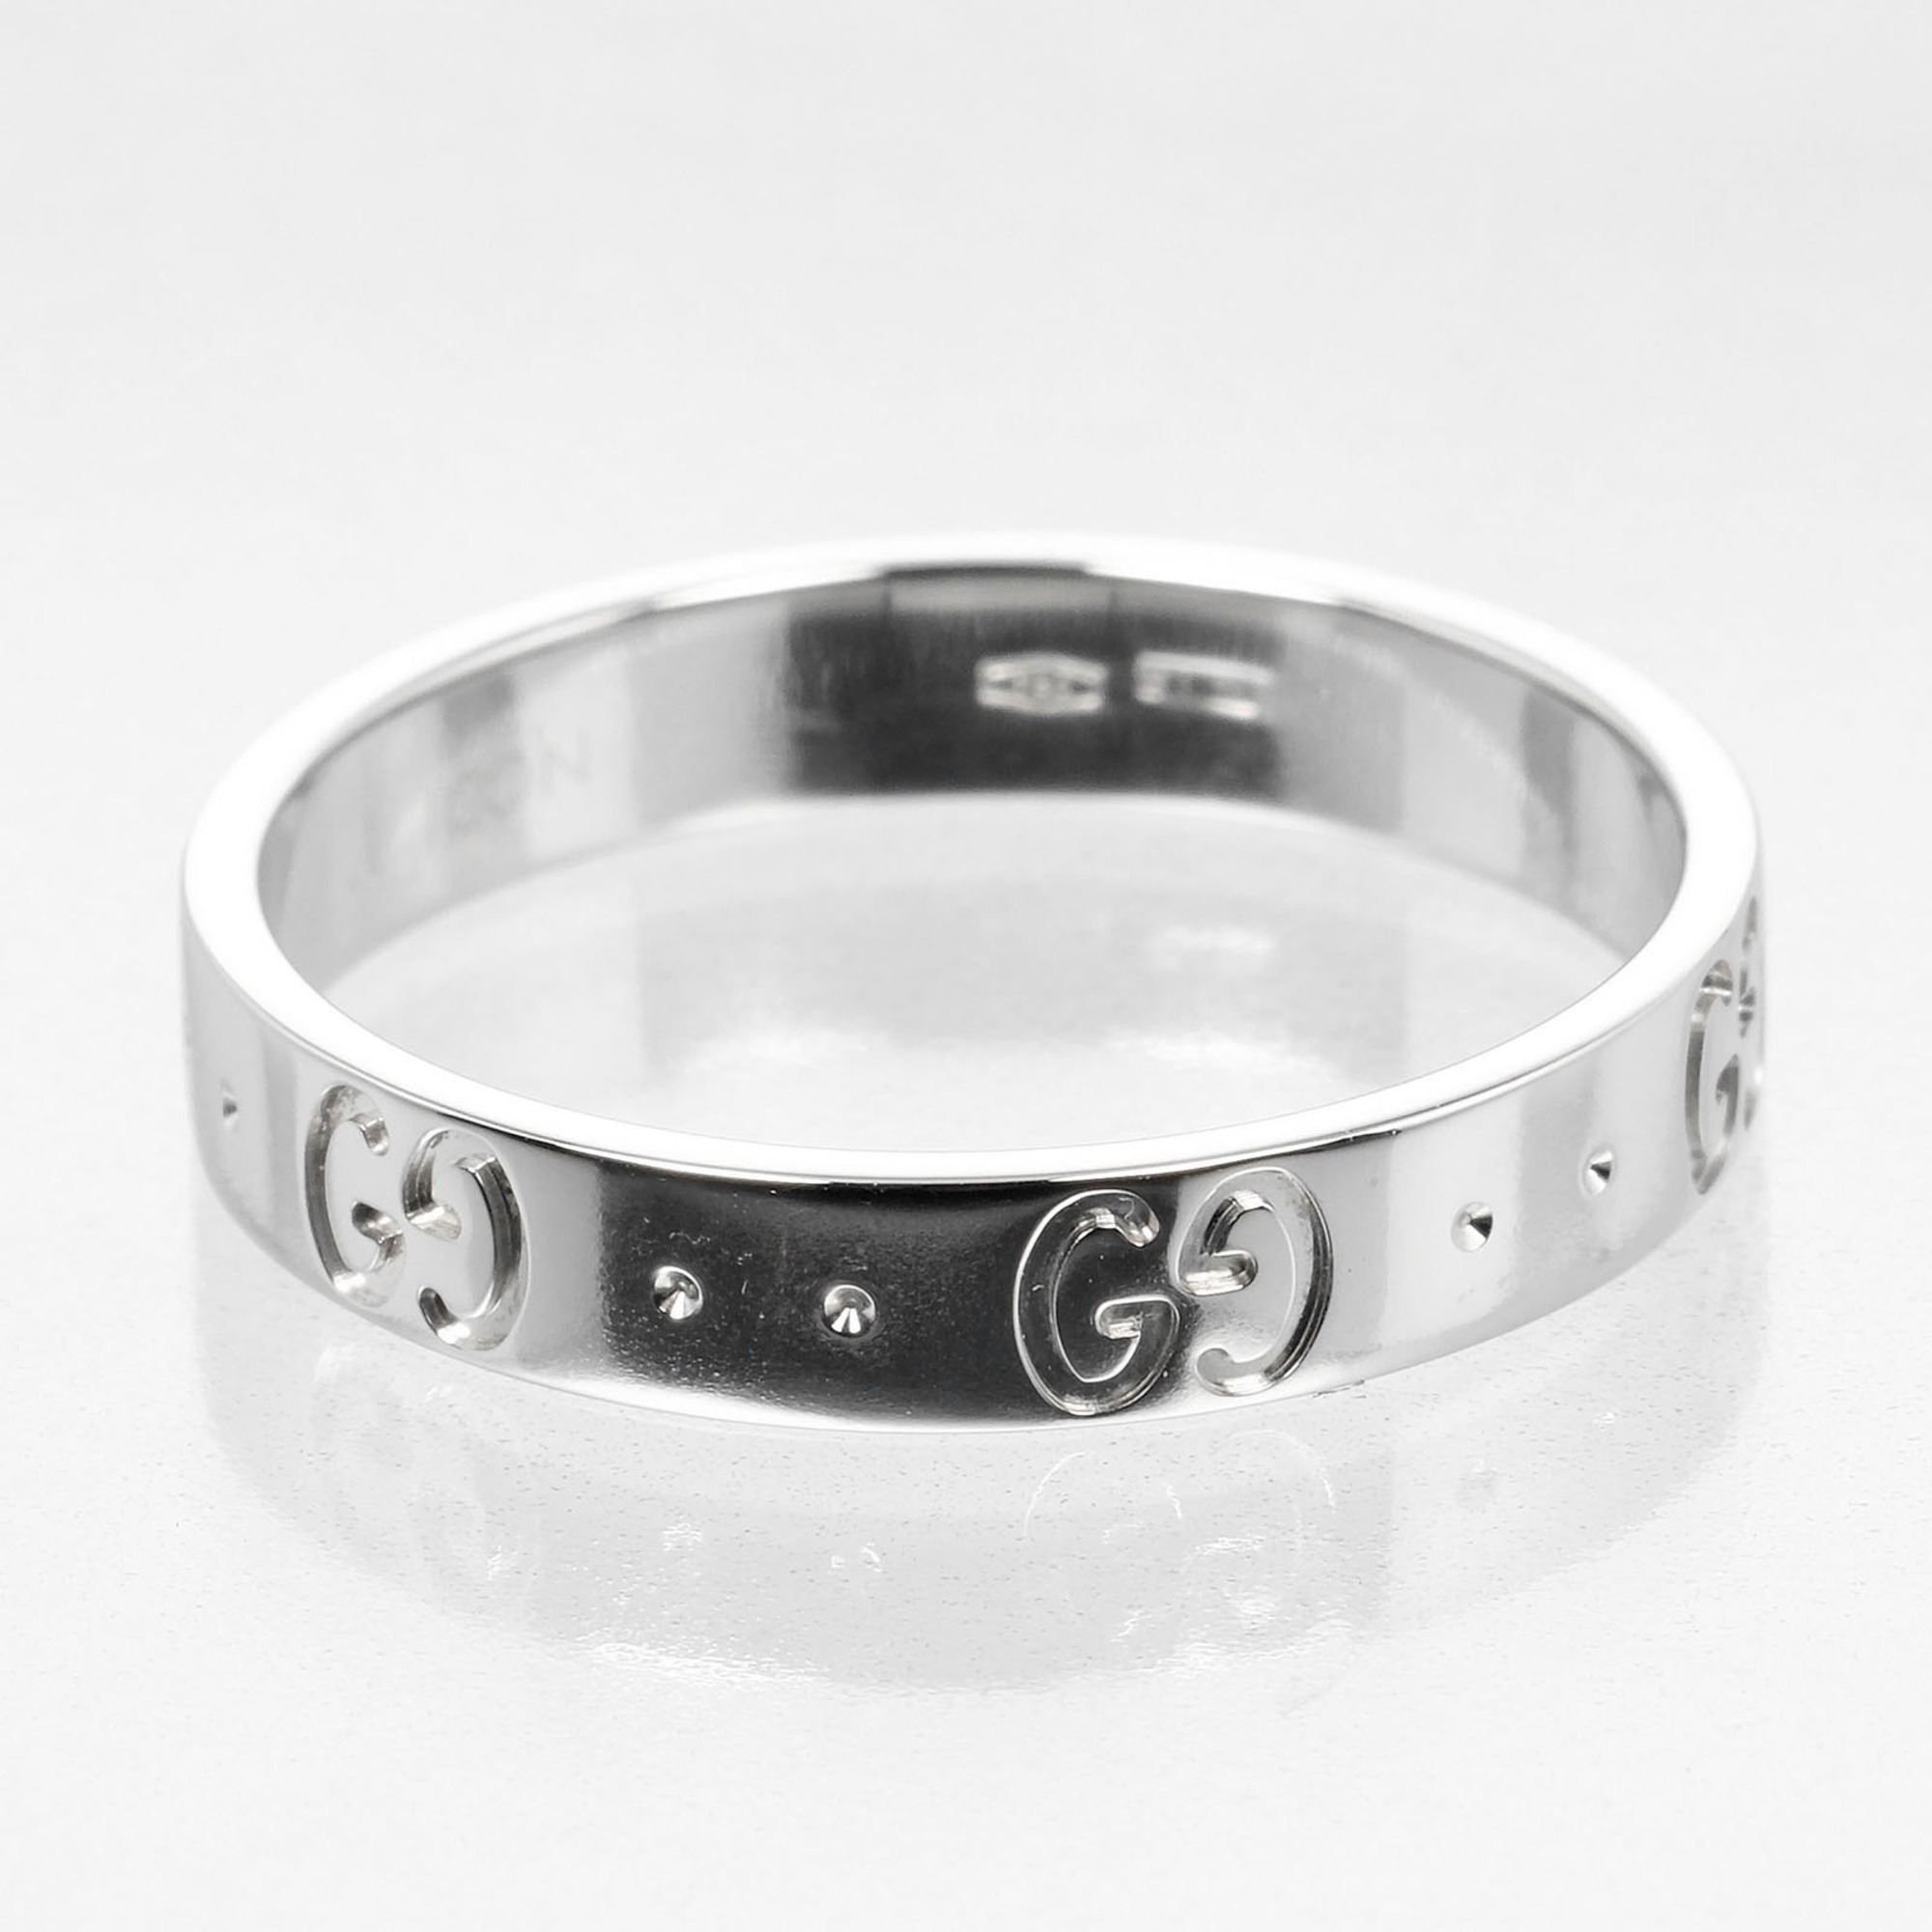 Gucci GG Icon size 19 ring, K18 WG white gold, approx. 3.92g I132124016